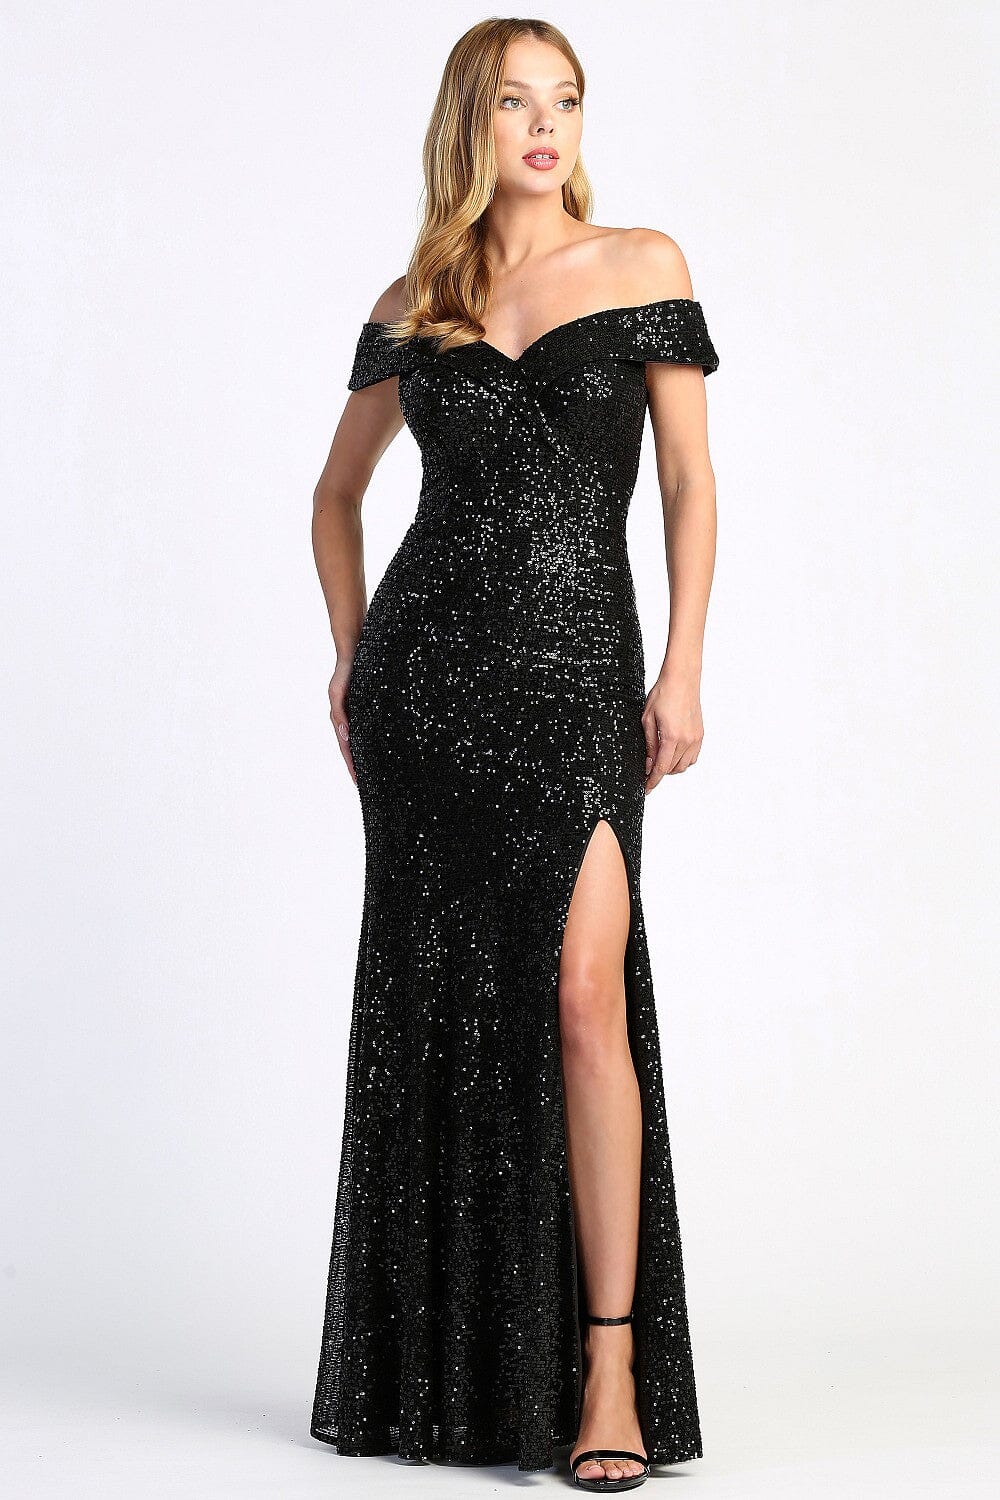 Fitted Sequin Off Shoulder Slit Gown by Adora 3059